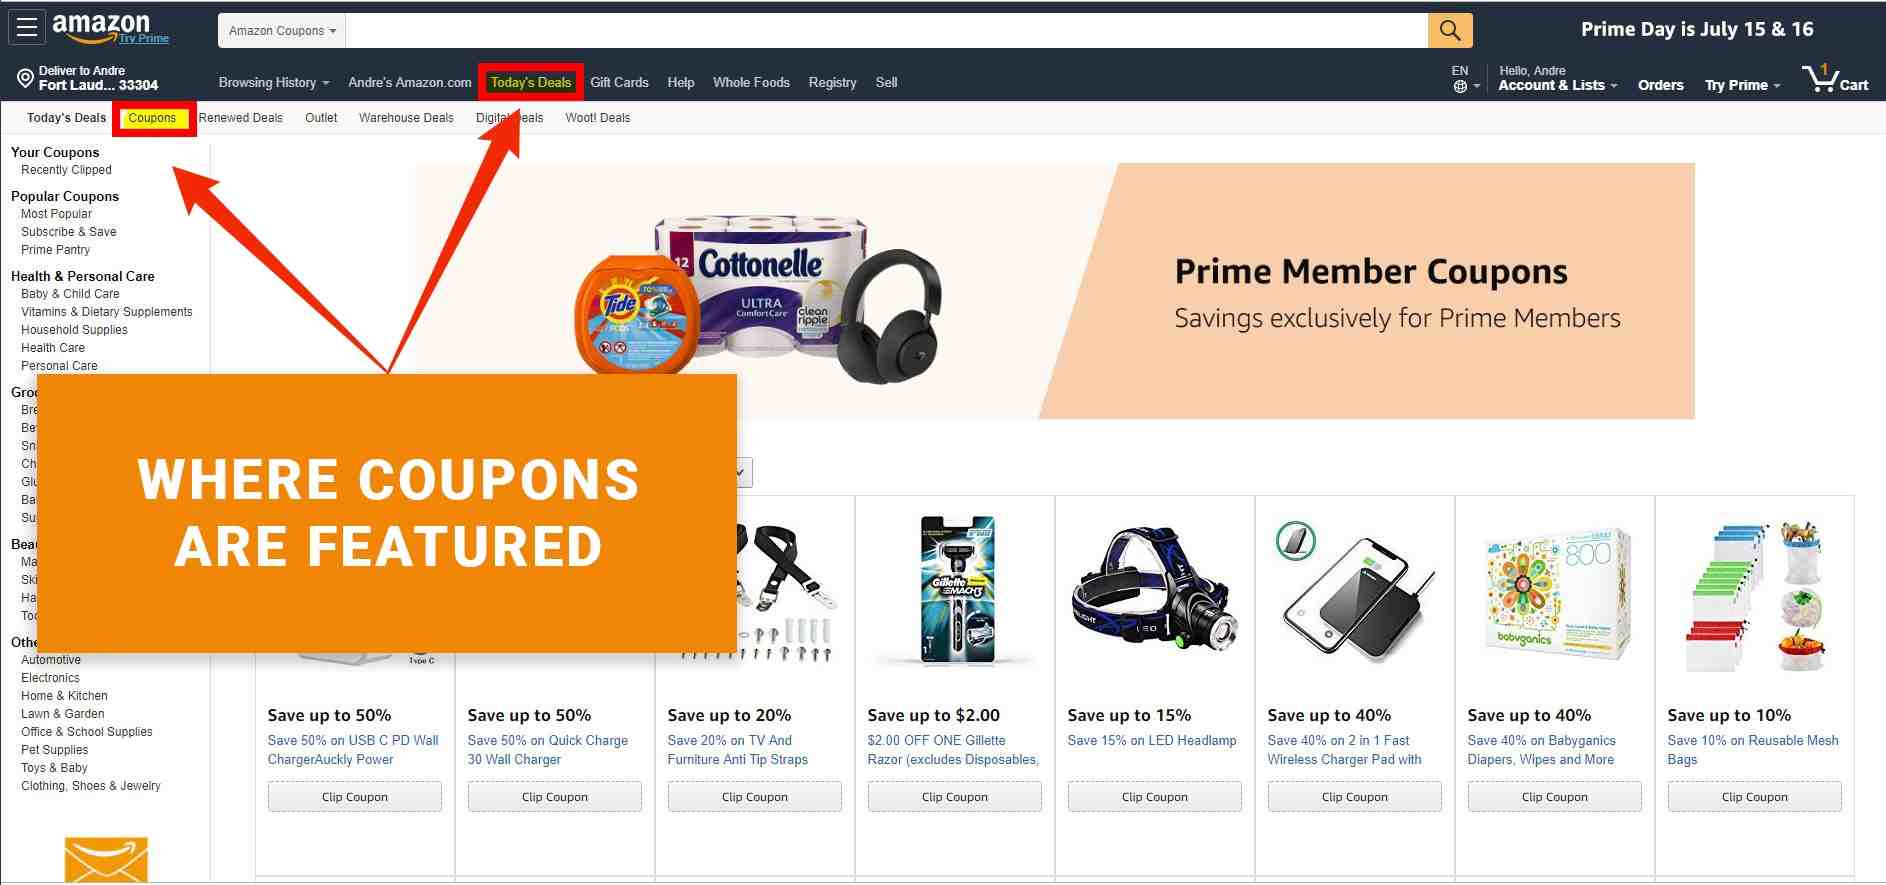 How can I get a discount on my Amazon purchase?